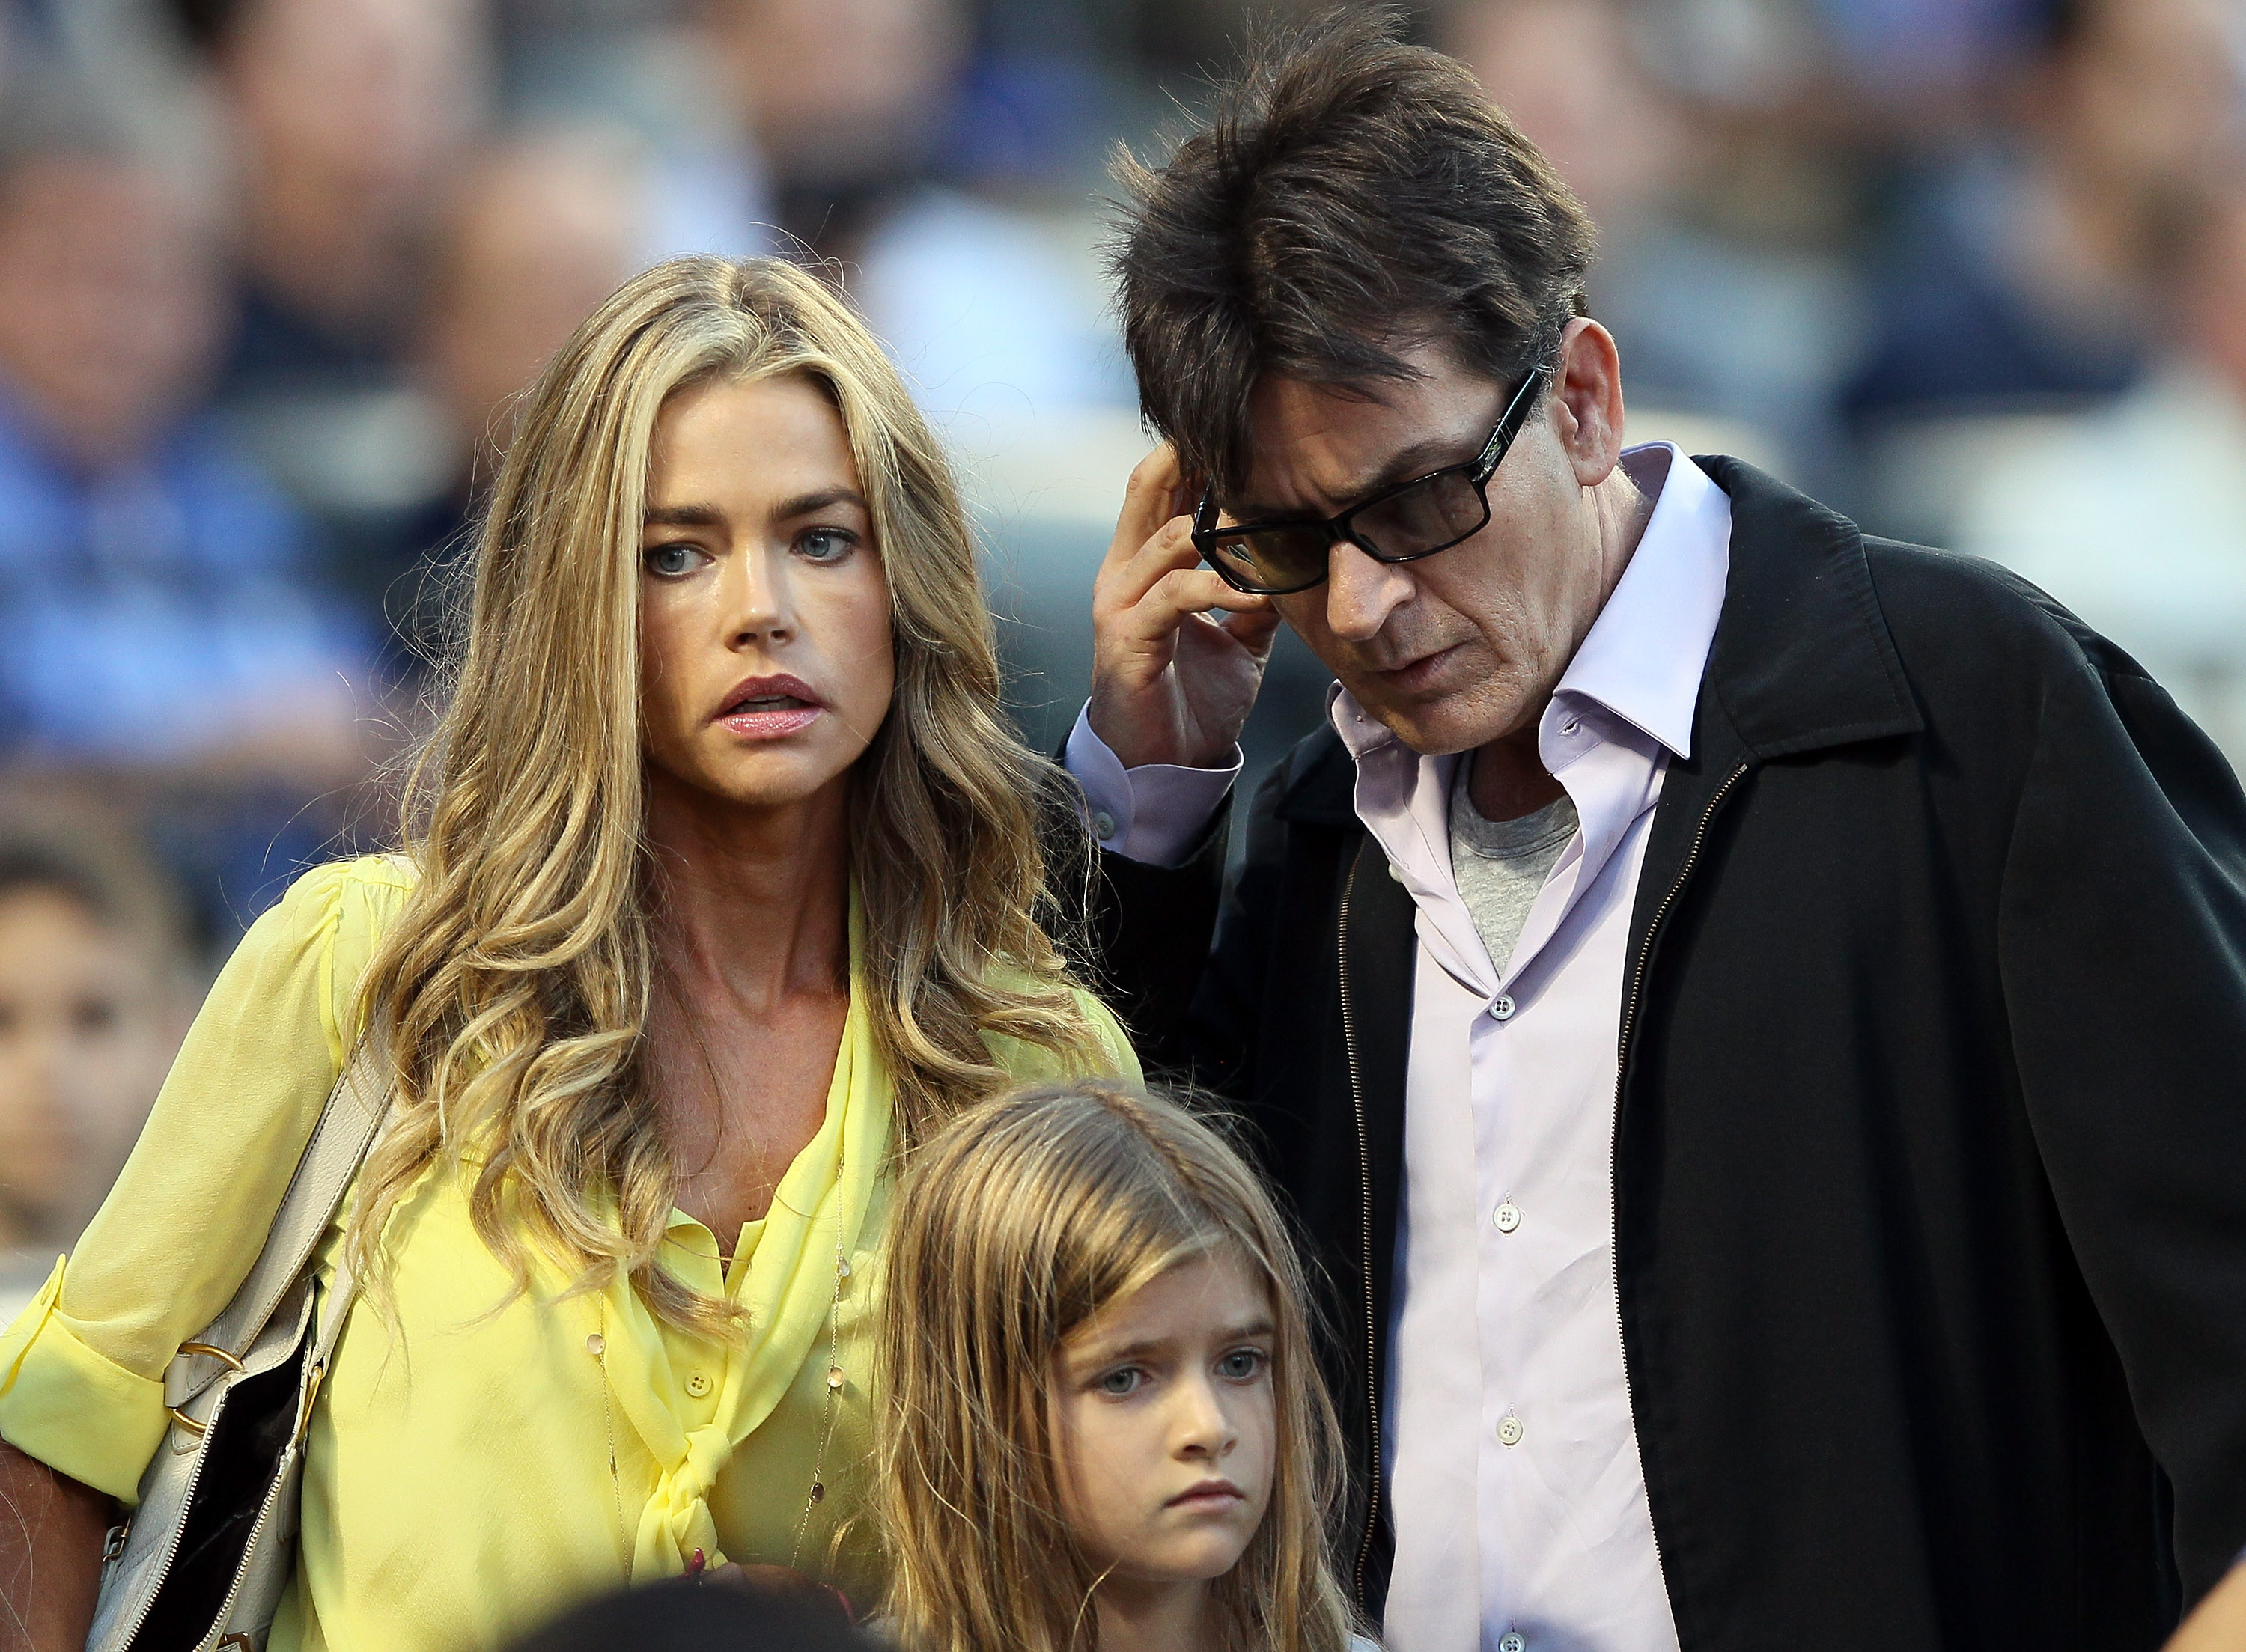 Denise Richards and Charlie Sheen with one their daughter in New York in 2012 | Source: Getty Images